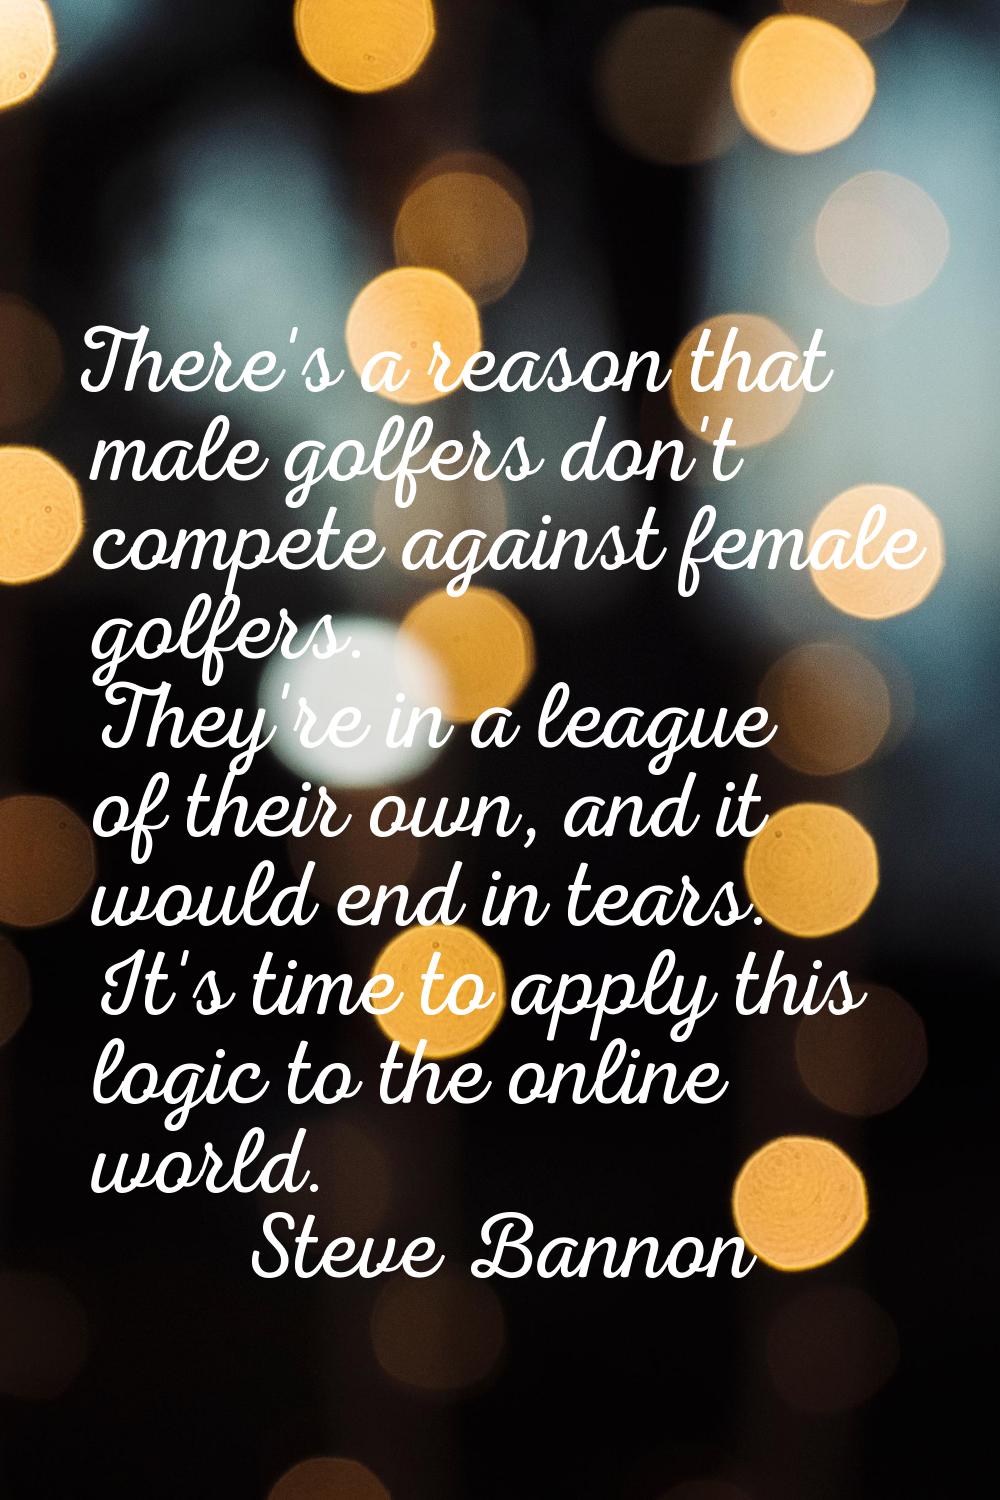 There's a reason that male golfers don't compete against female golfers. They're in a league of the